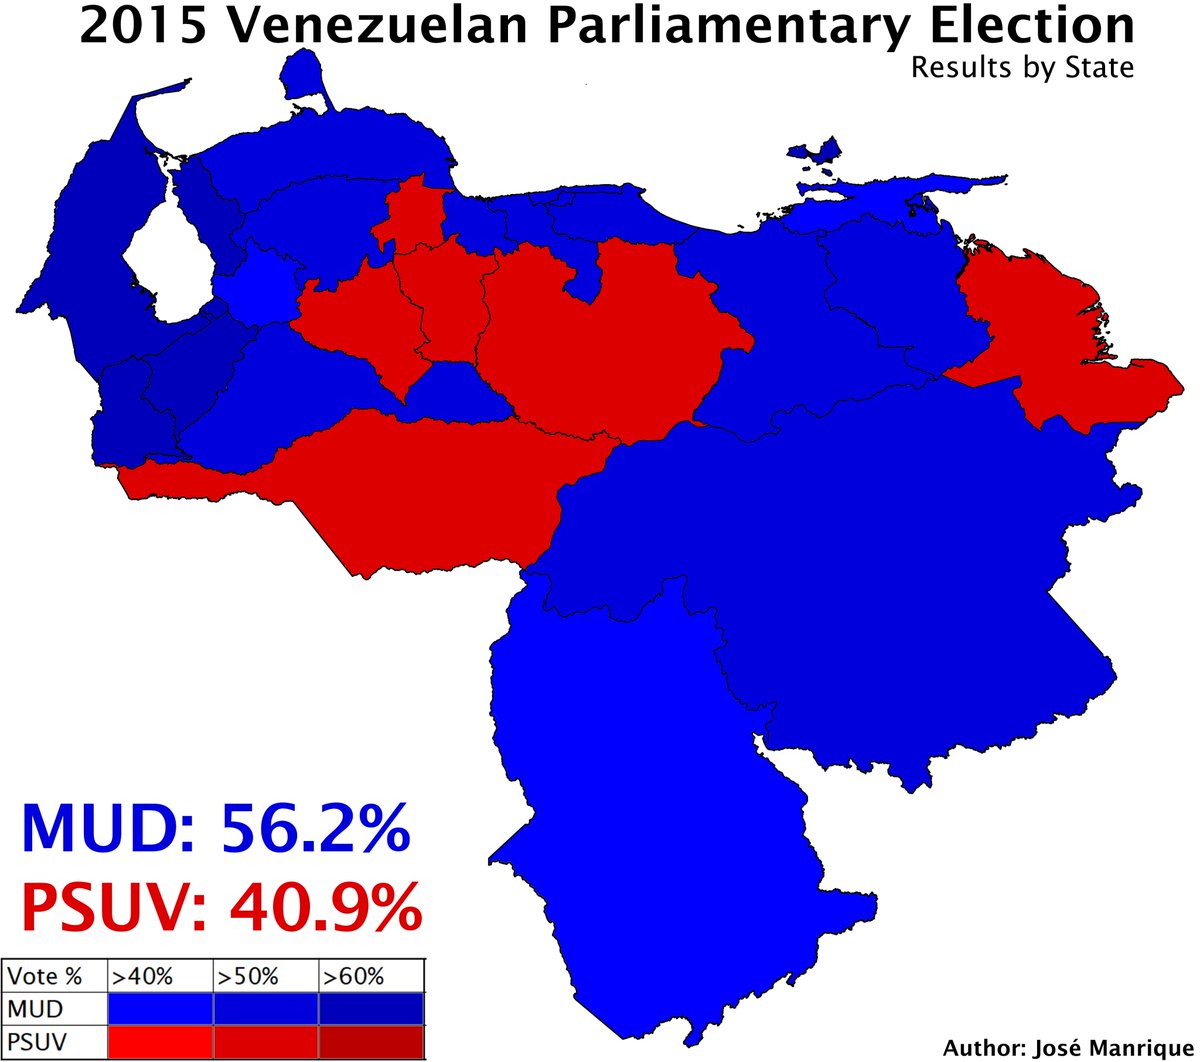 The results of the election by state show a few surprising outcomes. Barinas, the late Hugo Chávez's home state, was won by the MUD. Monagas, Vargas, Aragua, and Trujillo (this one in particular was especially shocking) which had always been won by chavismo, were won by the MUD.